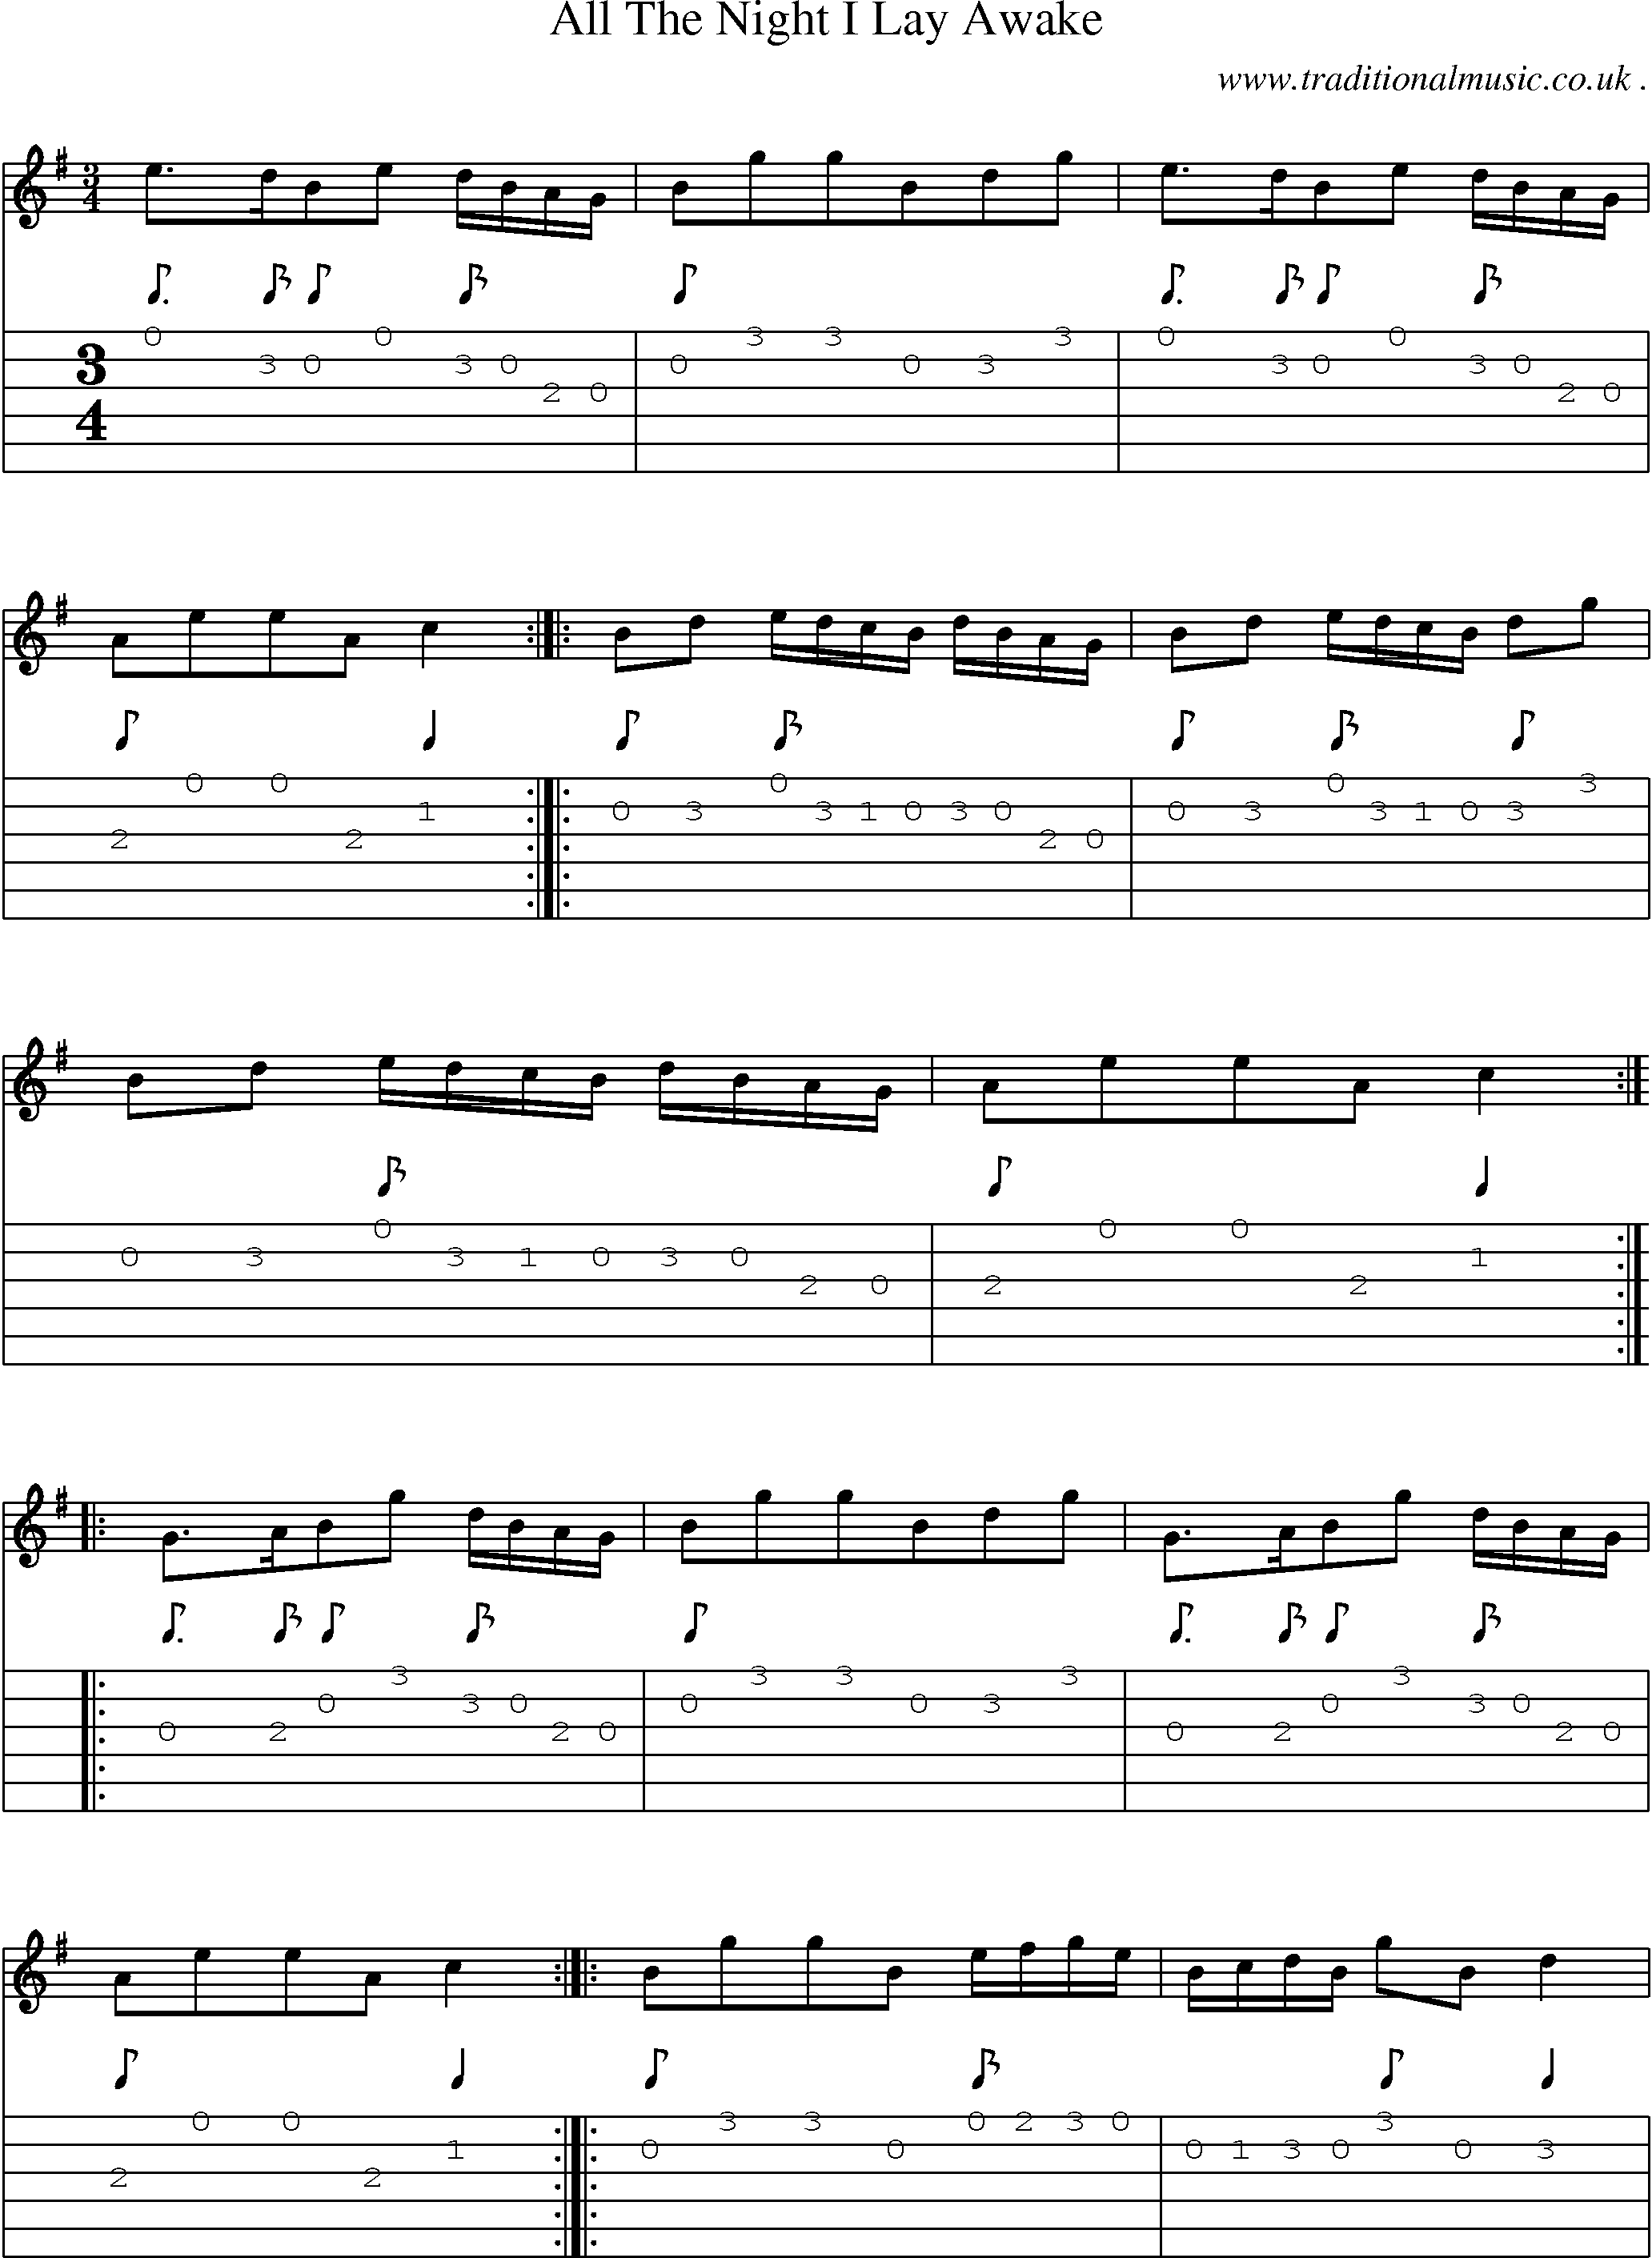 Sheet-Music and Guitar Tabs for All The Night I Lay Awake